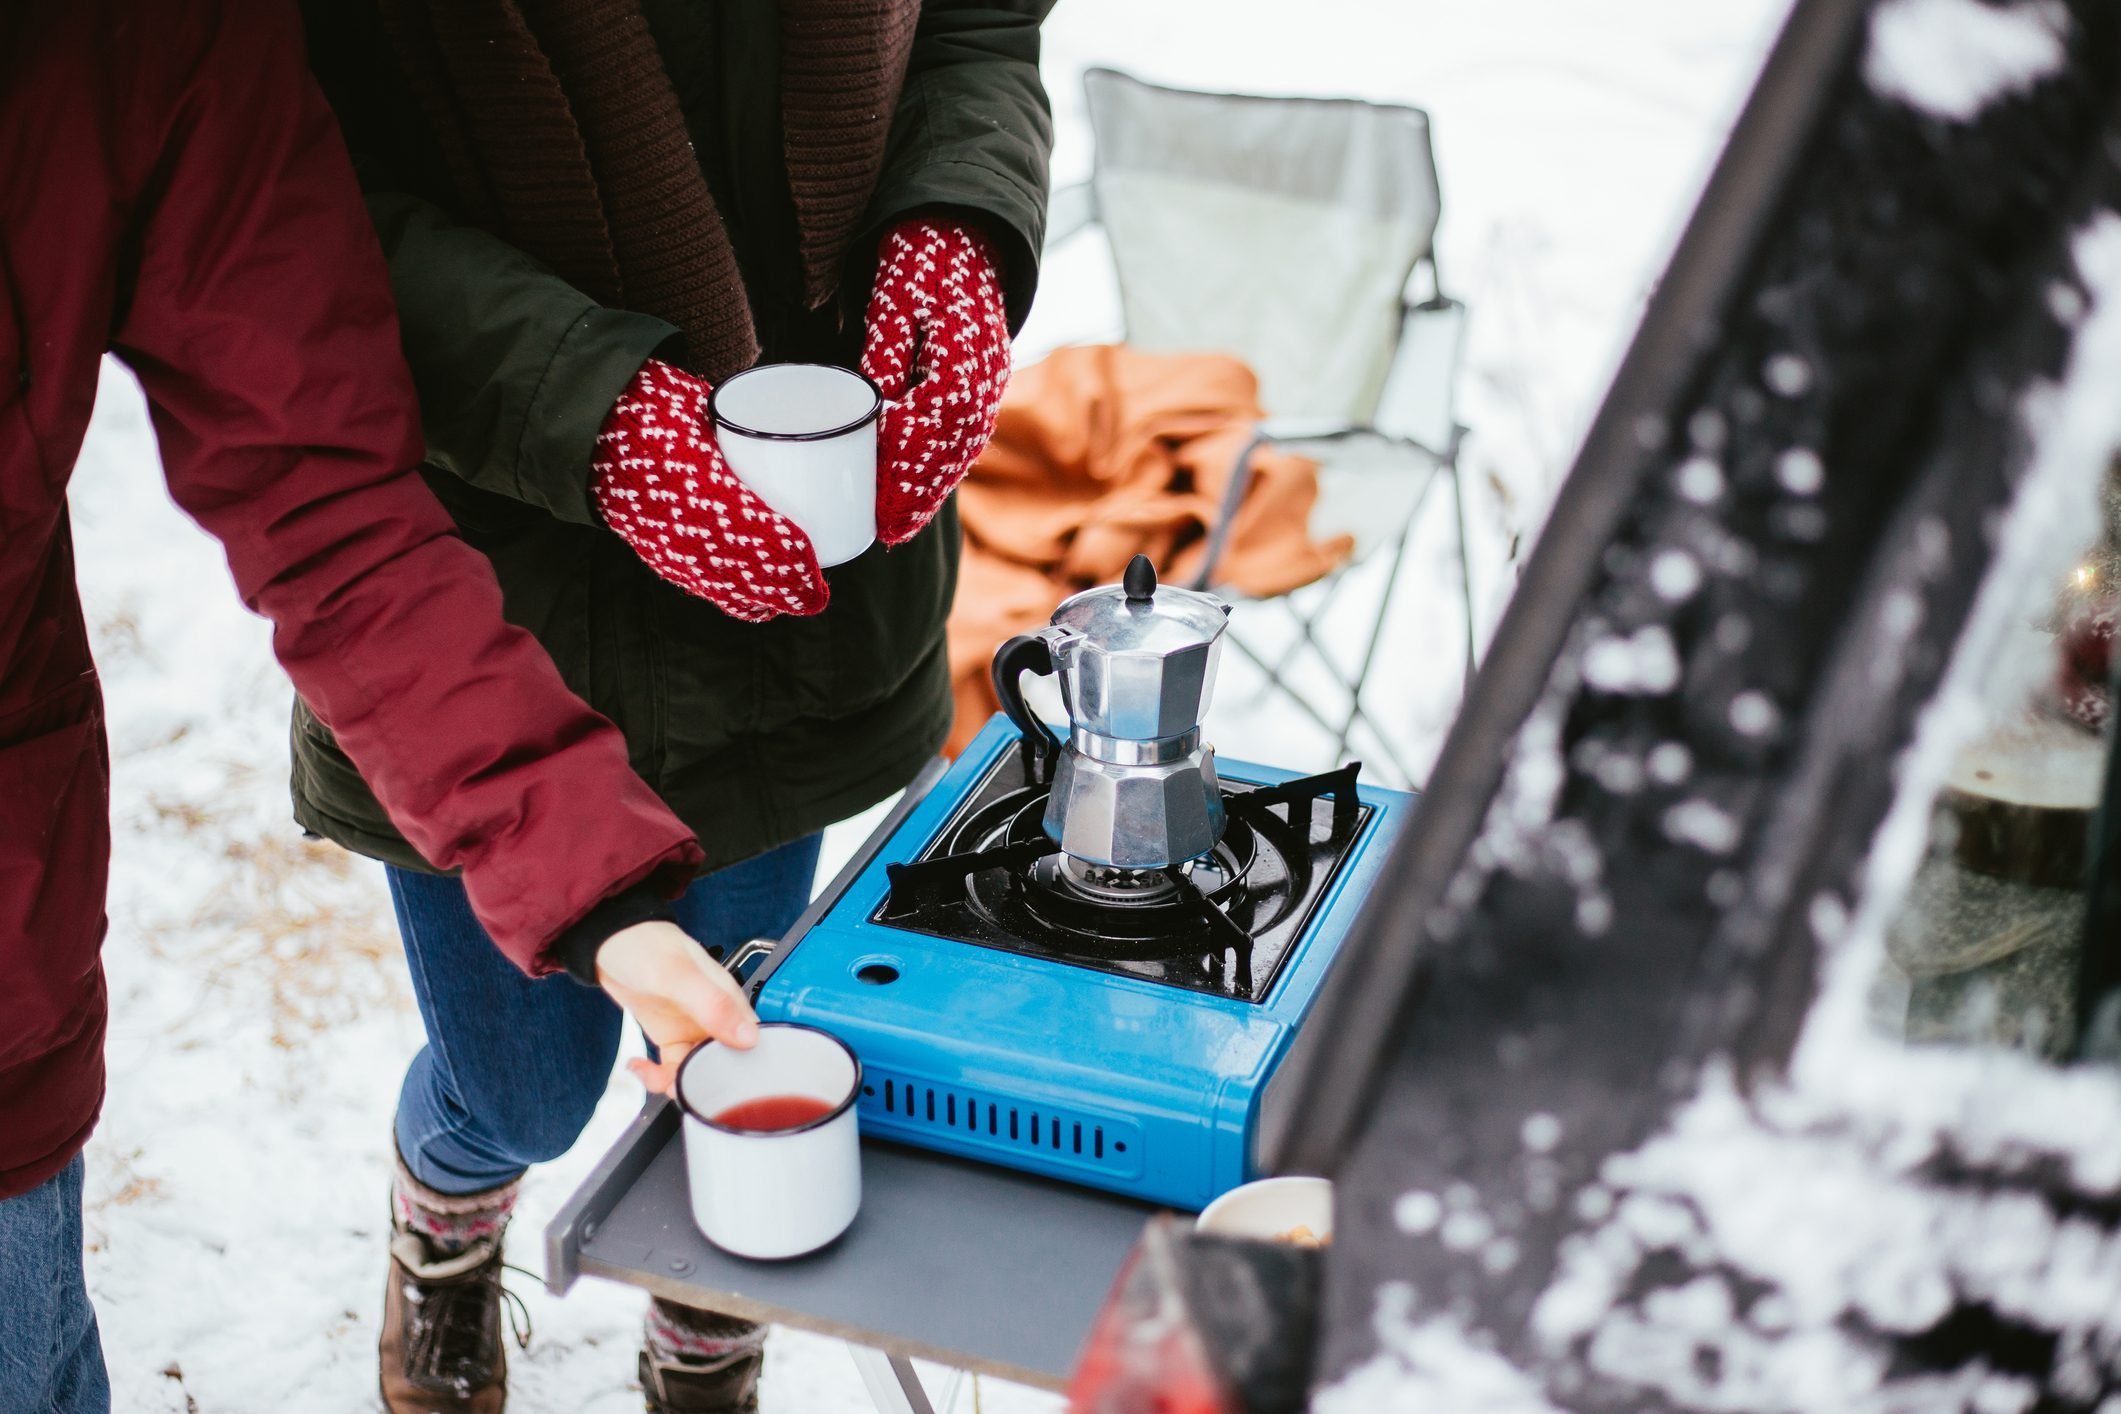 Why Should You Get a Portable Stove?